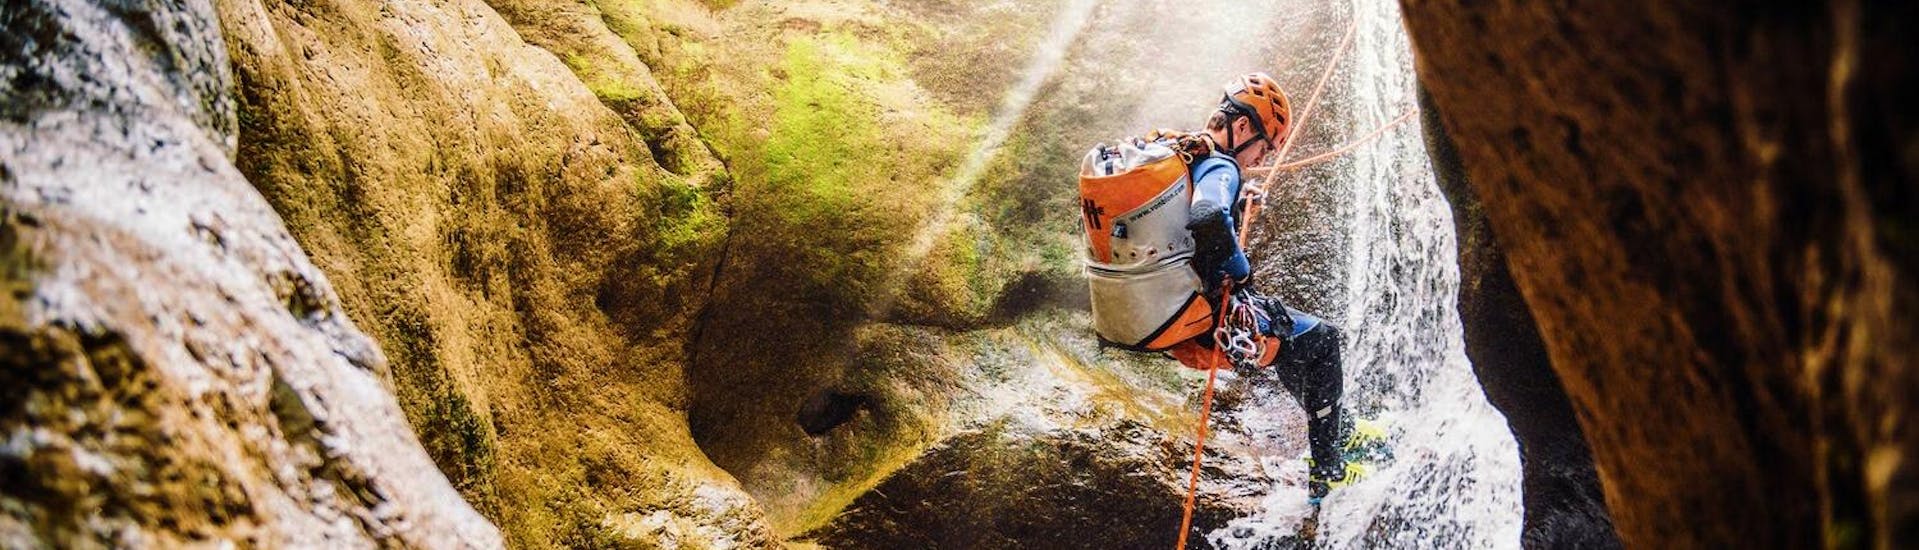 canyoning-for-sporty-nature-lovers-deep-roots-adventures-hero